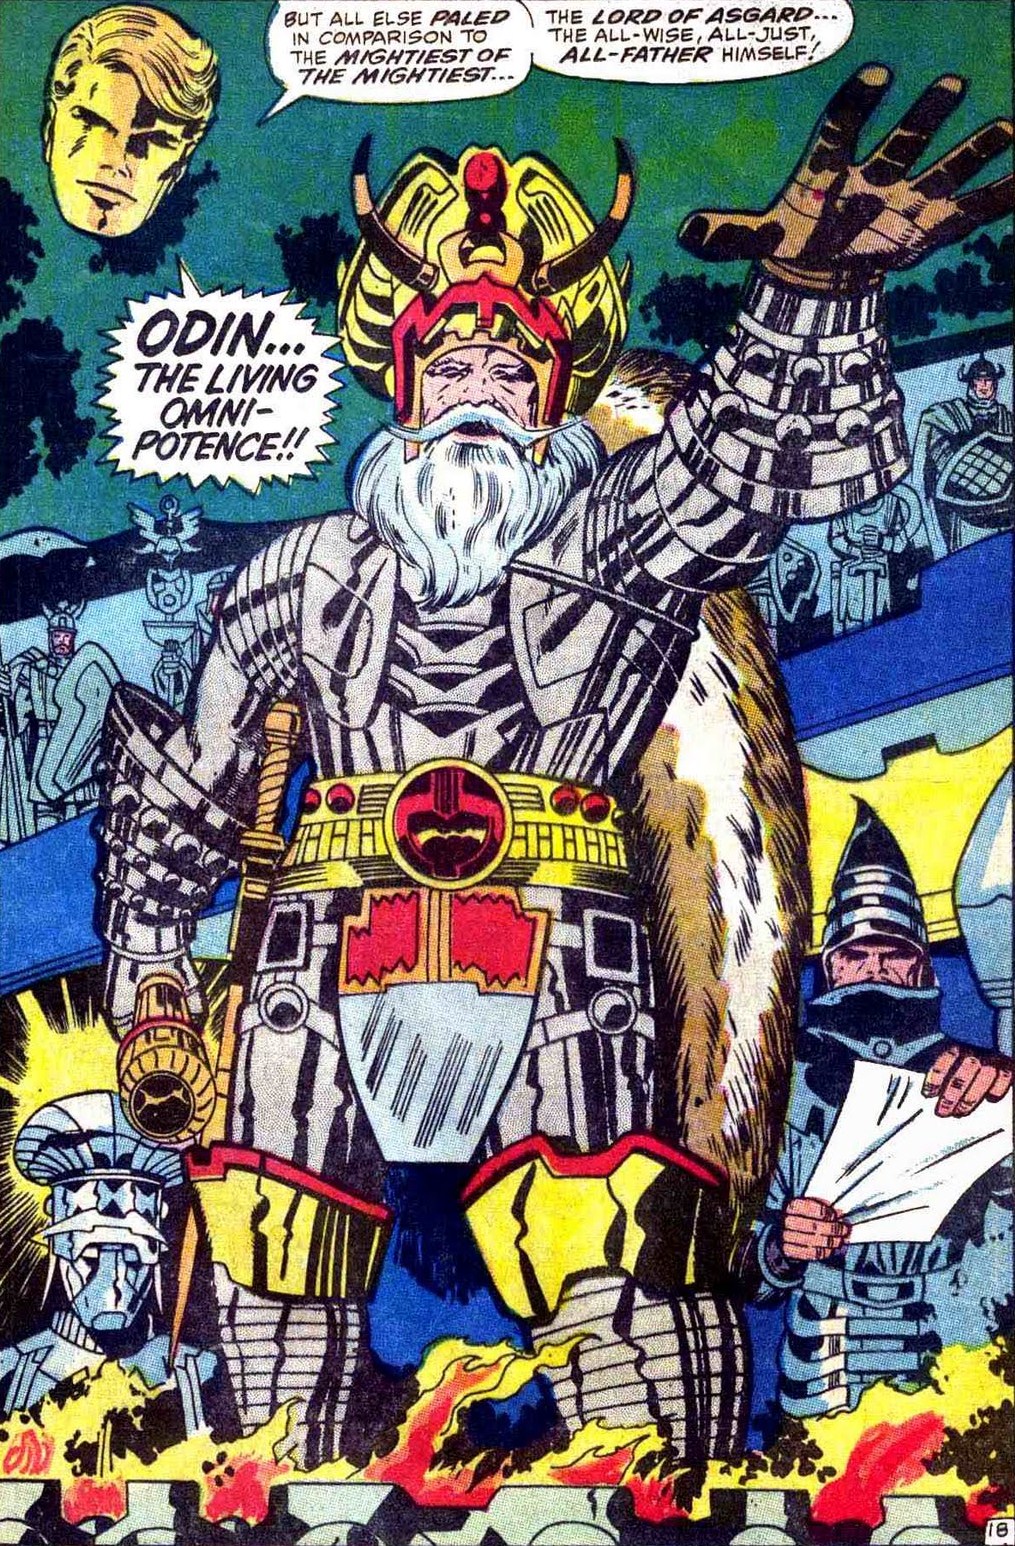 Odin, the mightiest of the mightiest, the living omnipotence